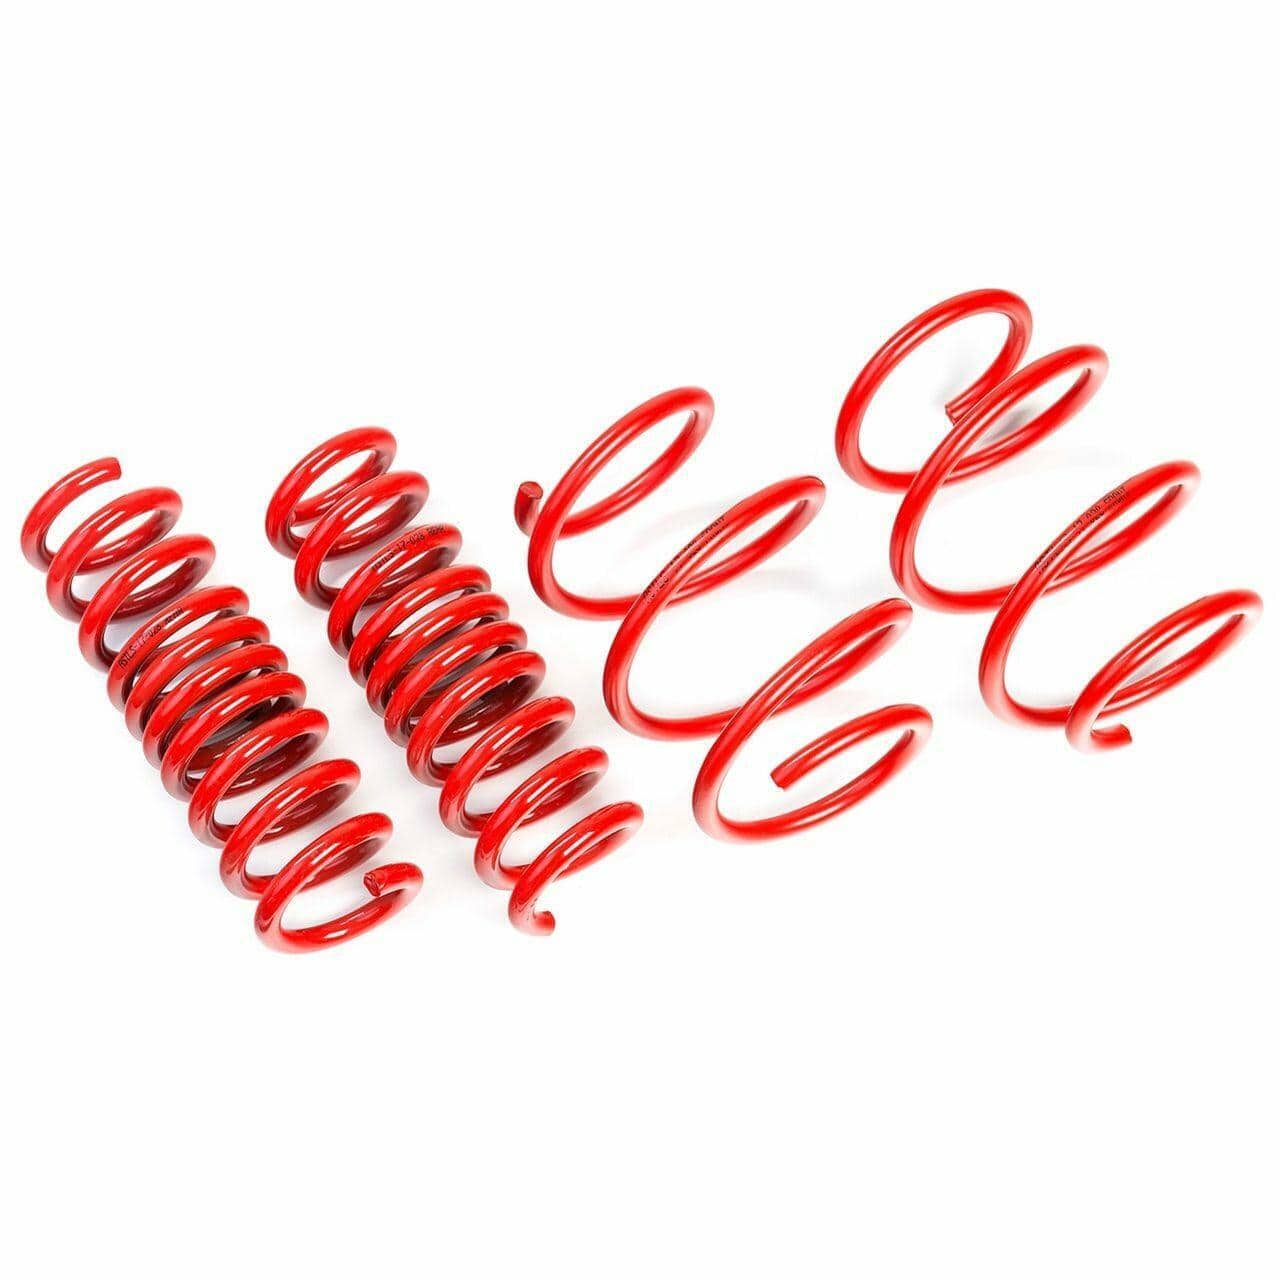 AST Suspension Lowering Springs (45MM/45MM) - 2006-2013 Nissan Note 1.5dCi (E11) ASTLS-14-1432